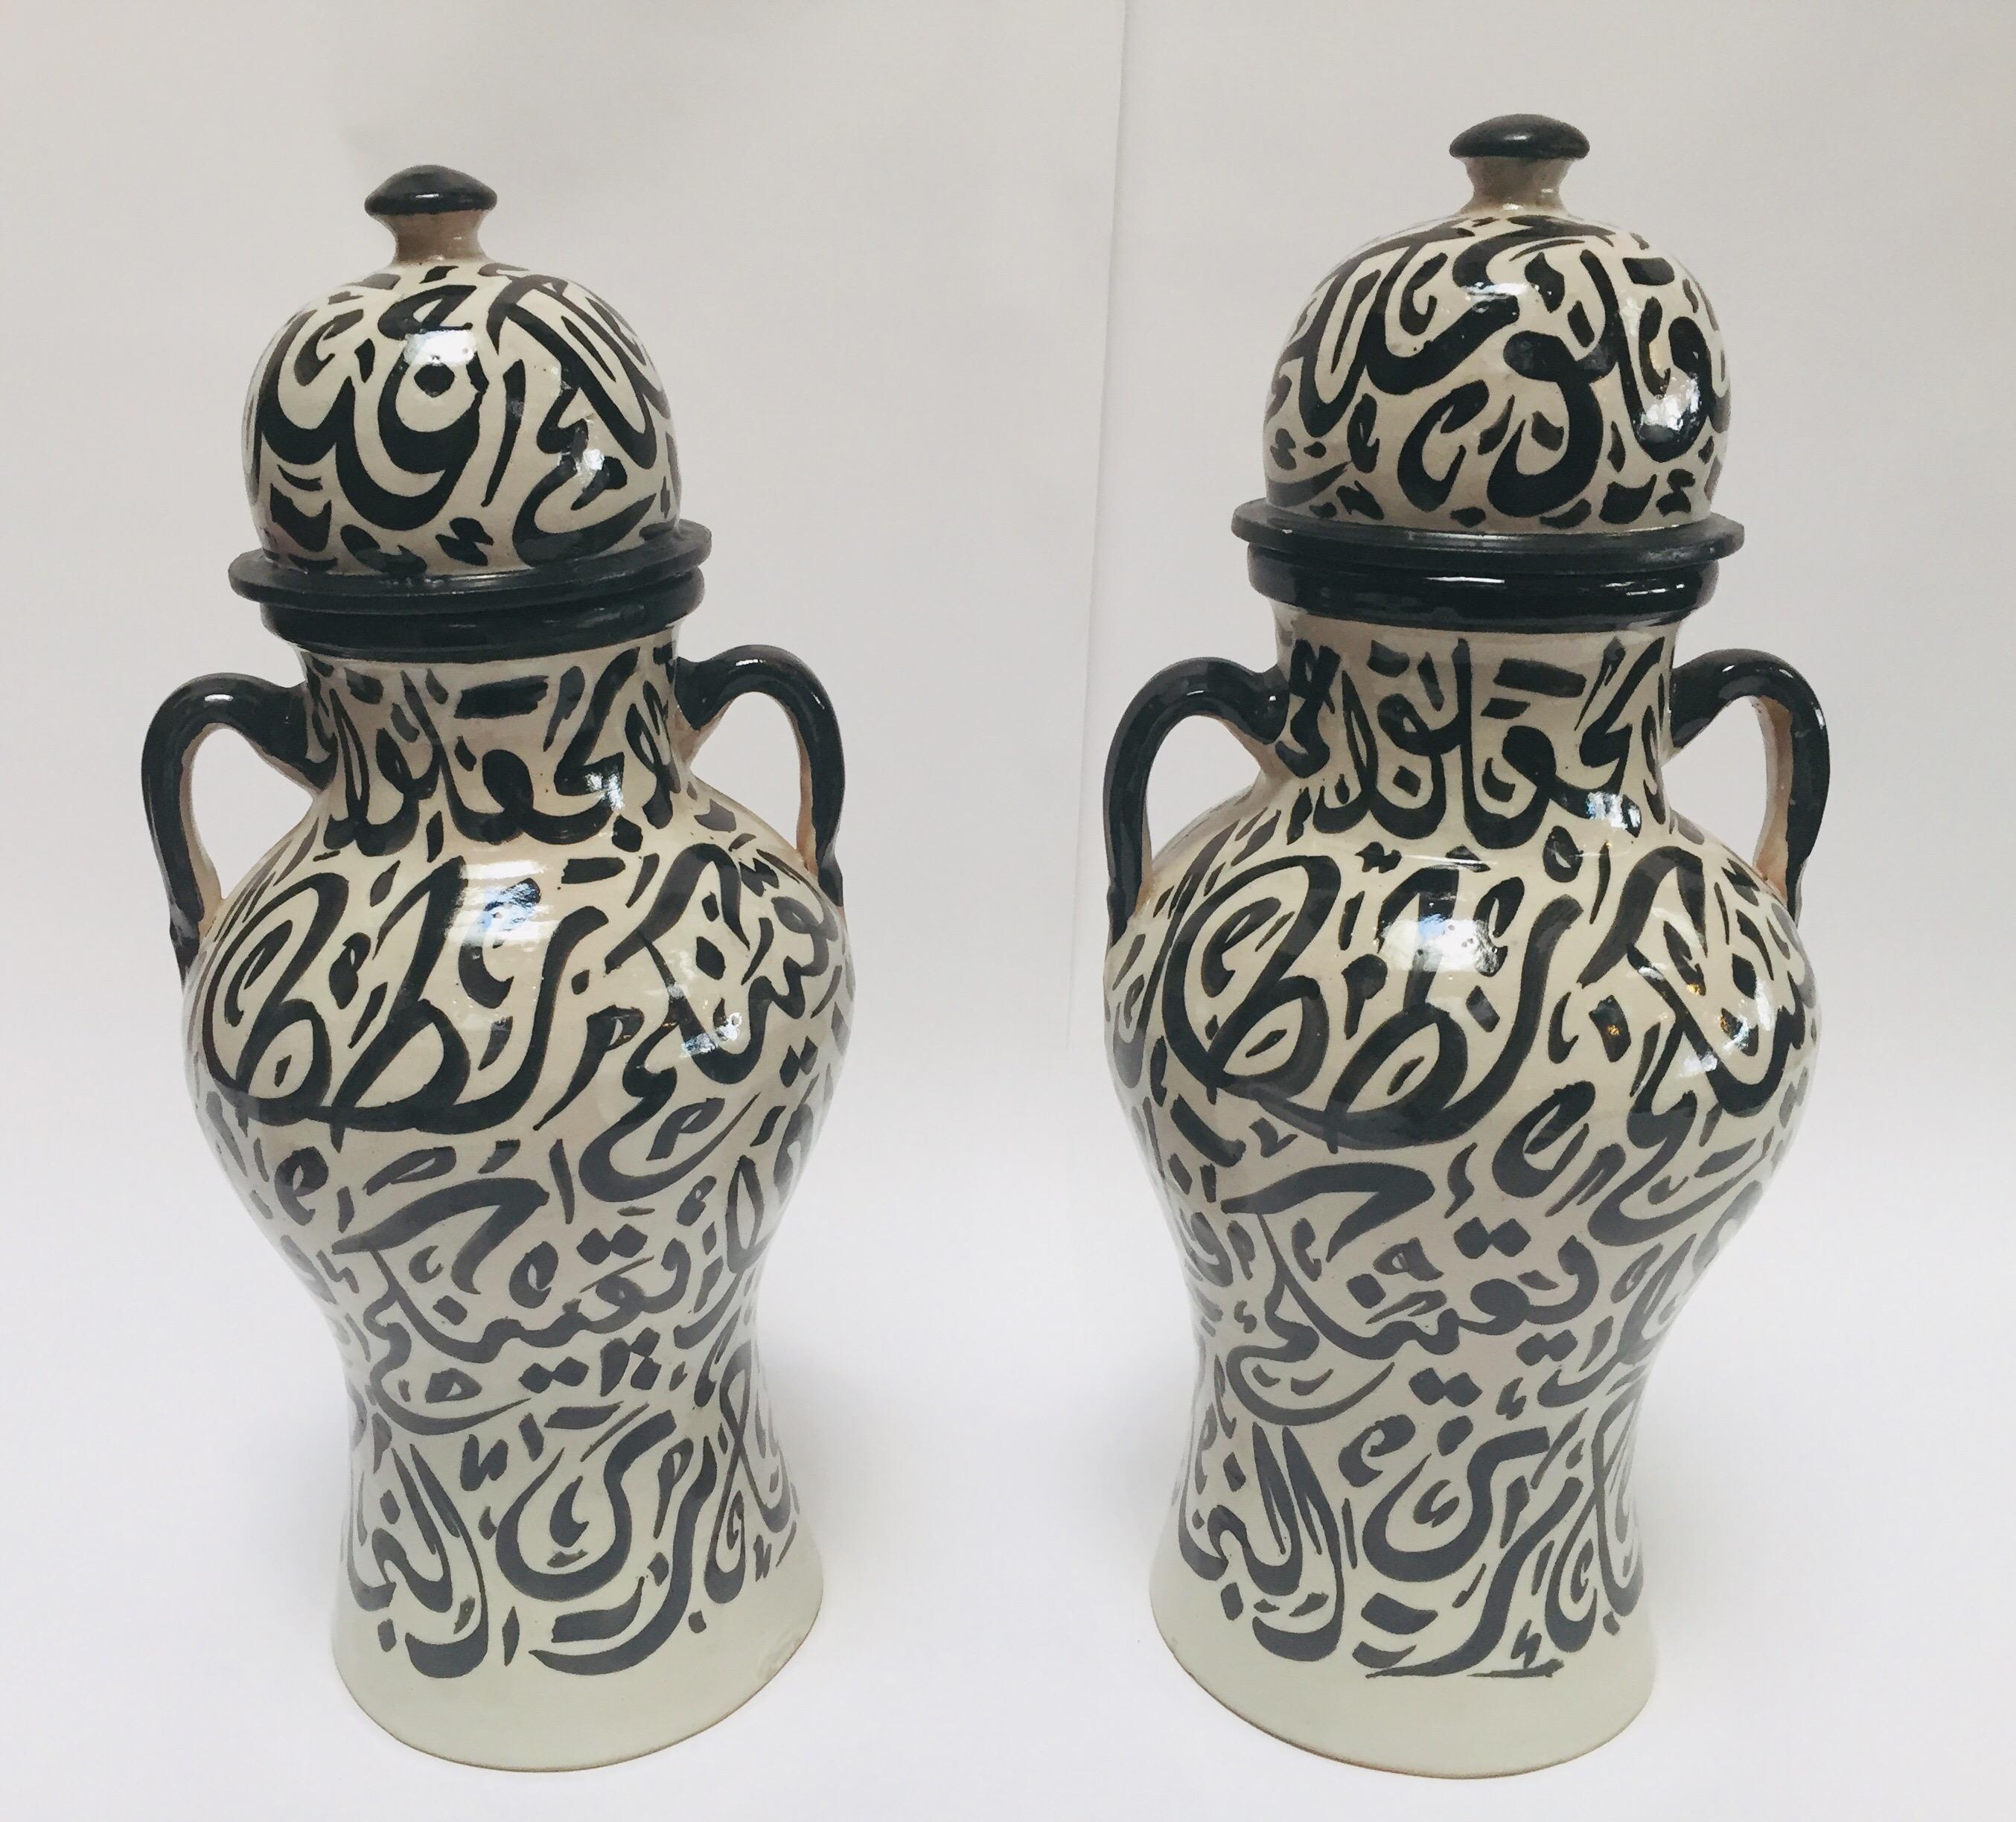 Pair of Moroccan glazed vintage ceramic decorative jars from Fez.
Moorish style ceramics vases handcrafted and hand painted in Fez with Arabic calligraphy writing design in black on ivory background.
This kind of Art Writing looks calligraphic is